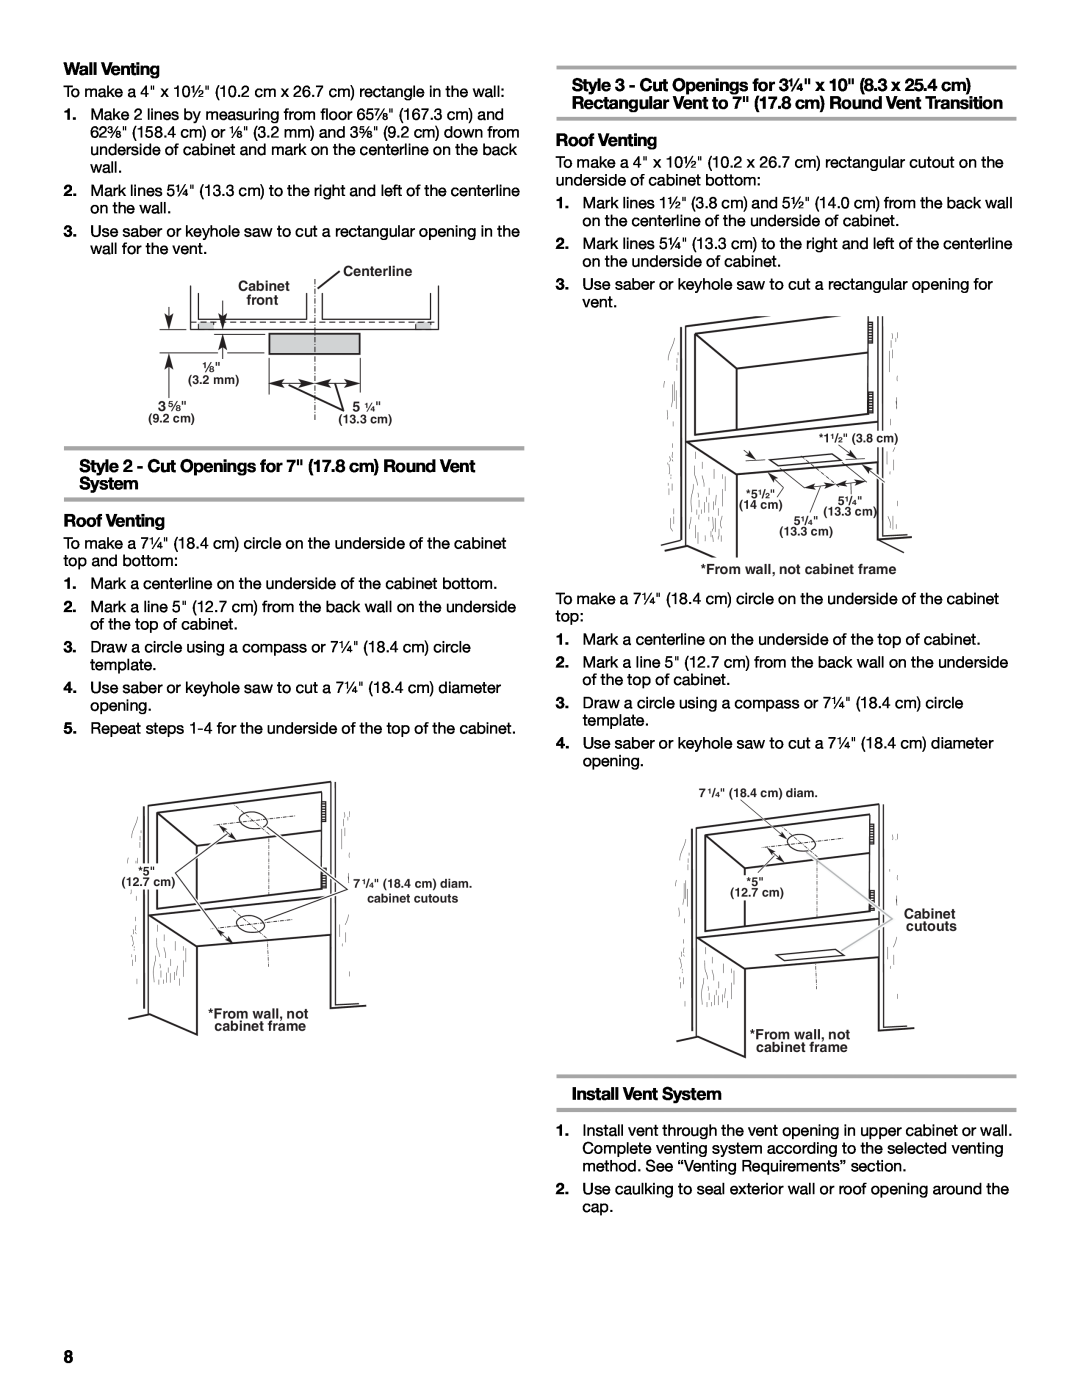 Whirlpool W10240546A, 99044504A installation instructions Wall Venting, Install Vent System, Roof Venting 